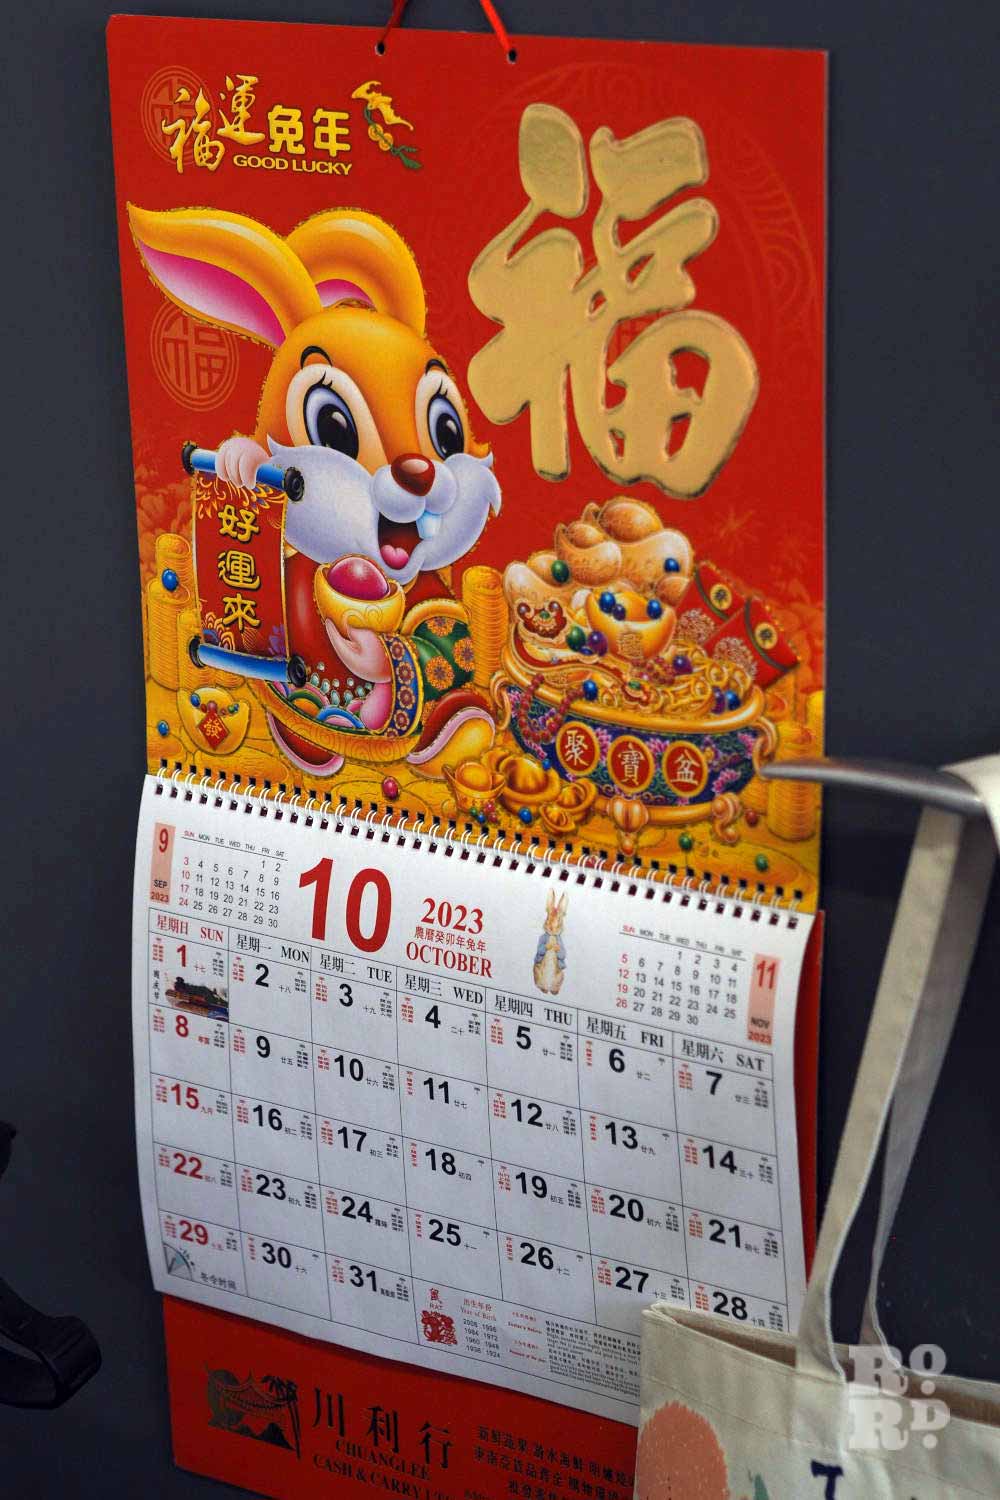 A Chinese calendar hung behind the door at the Chinese Association of Tower Hamlets in Limehouse.